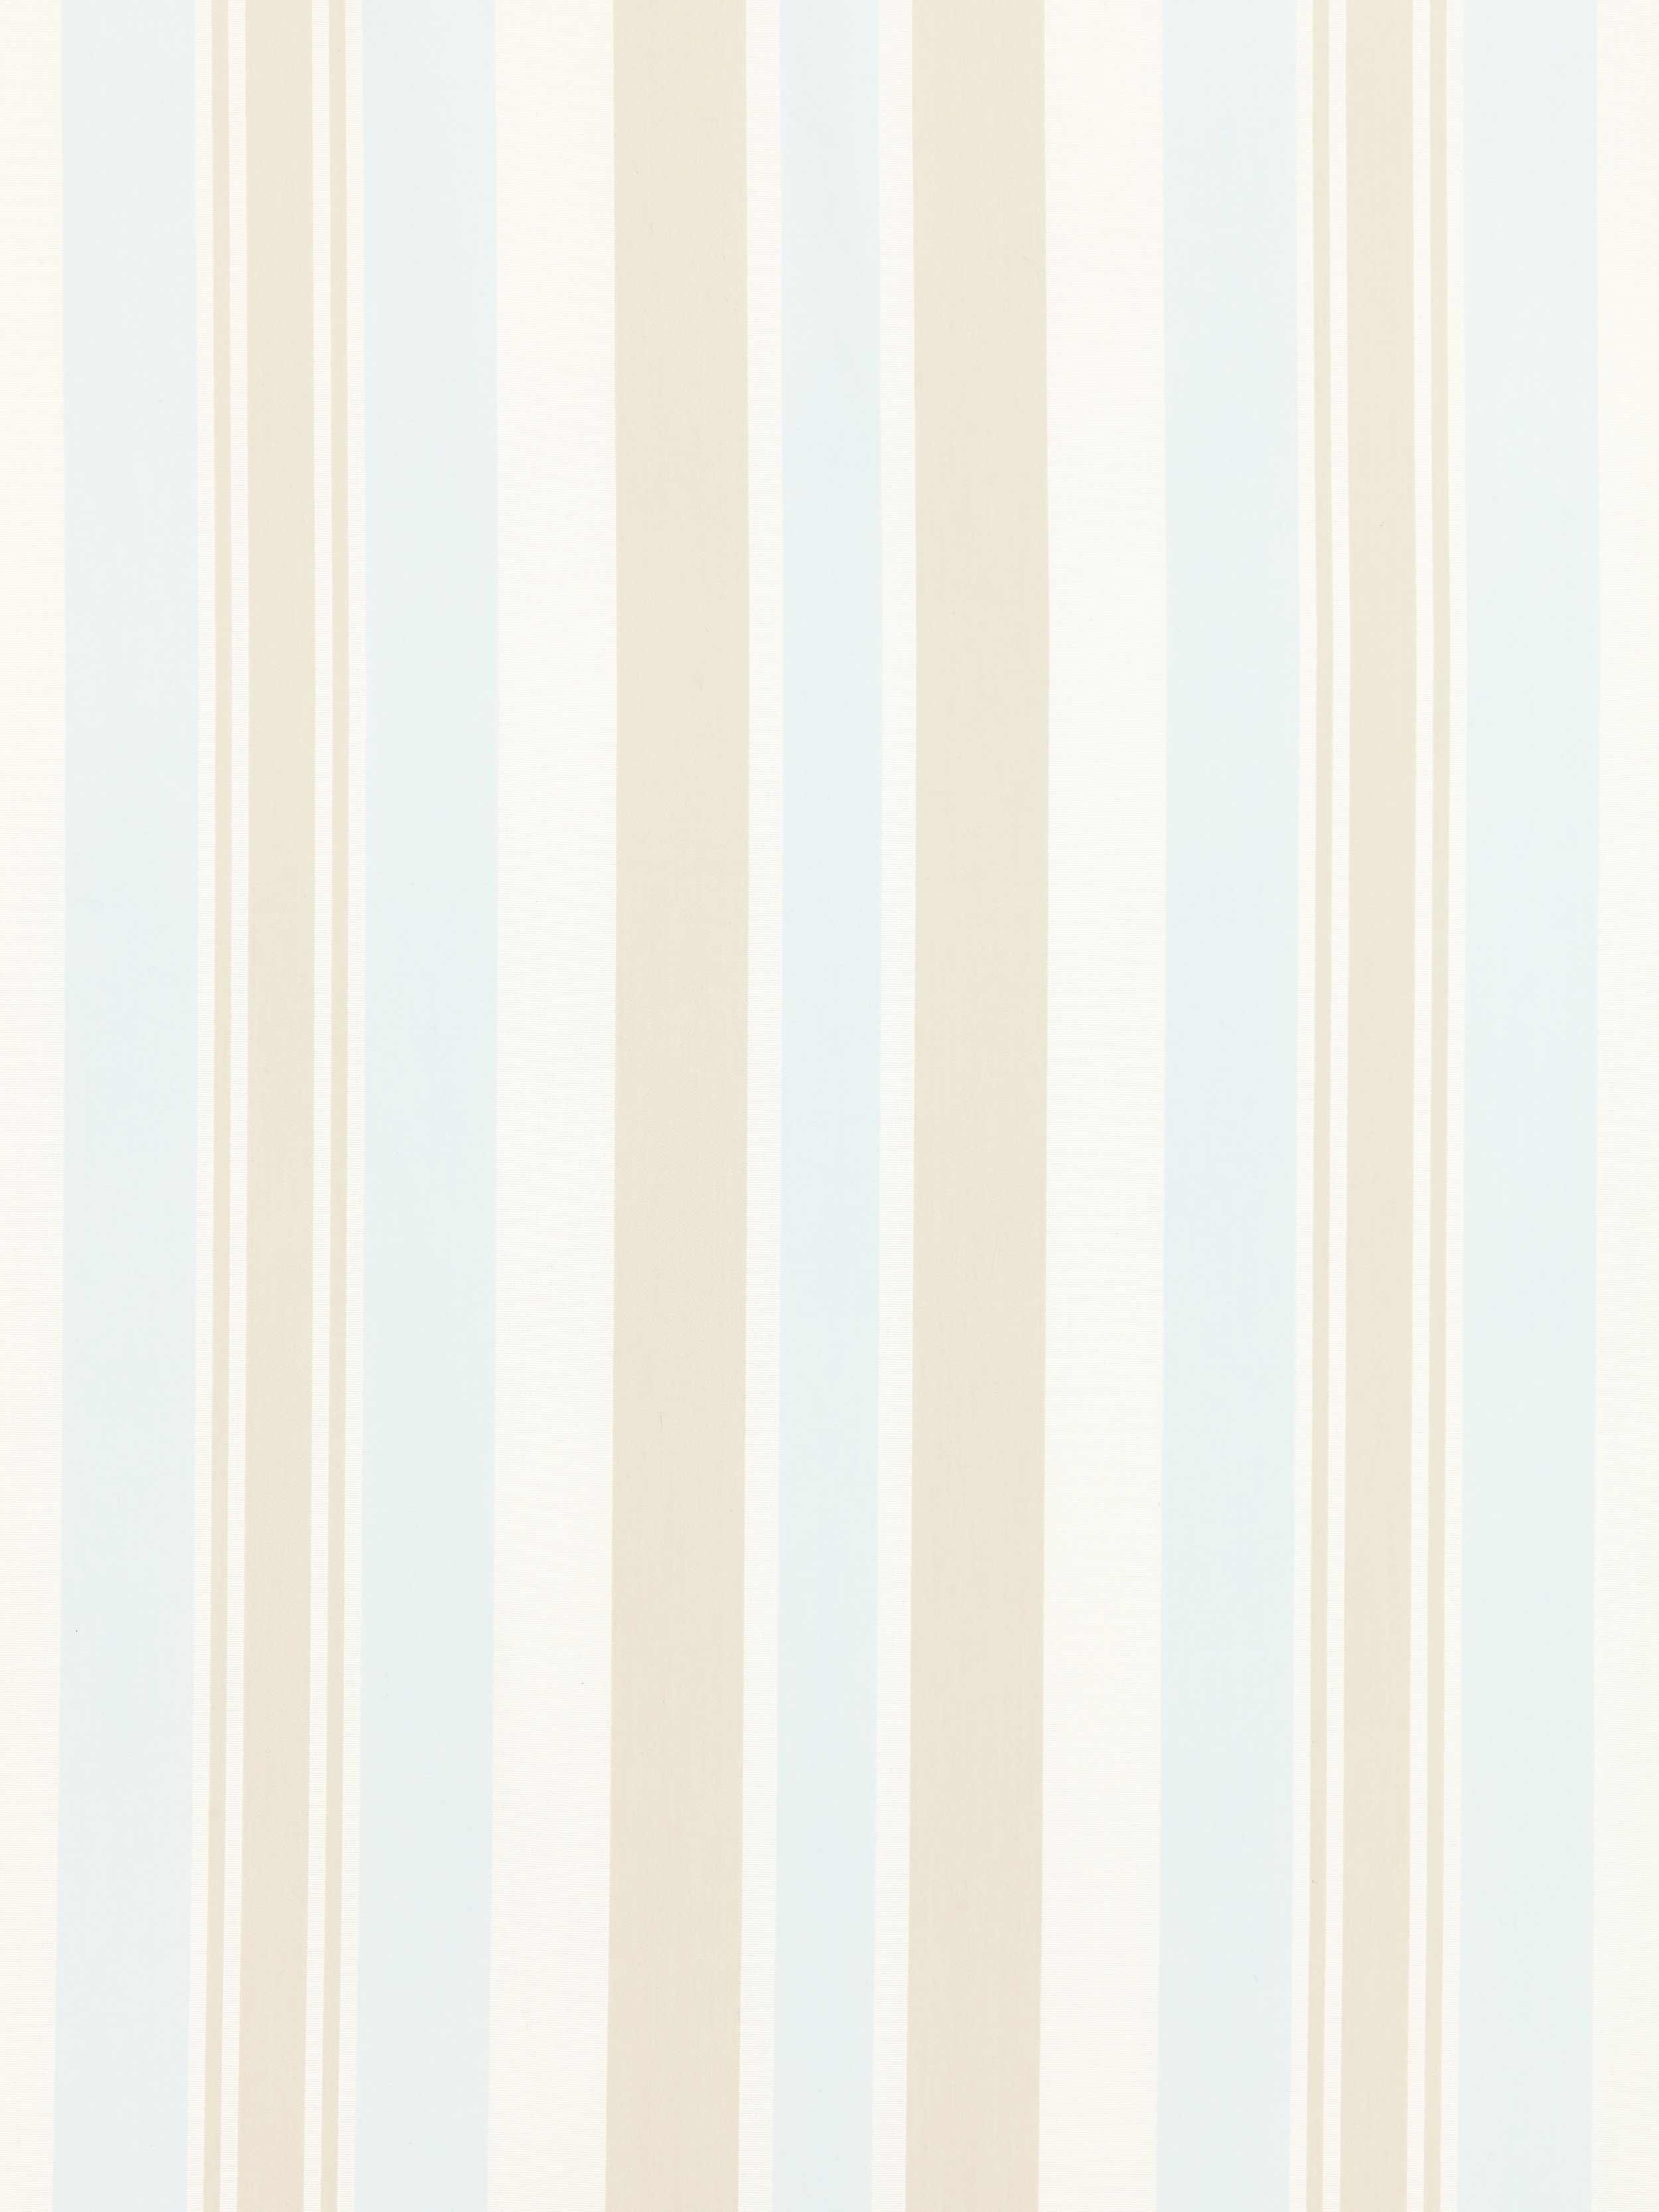 Mayfair Cotton Stripe fabric in sea gull color - pattern number SC 000227112 - by Scalamandre in the Scalamandre Fabrics Book 1 collection